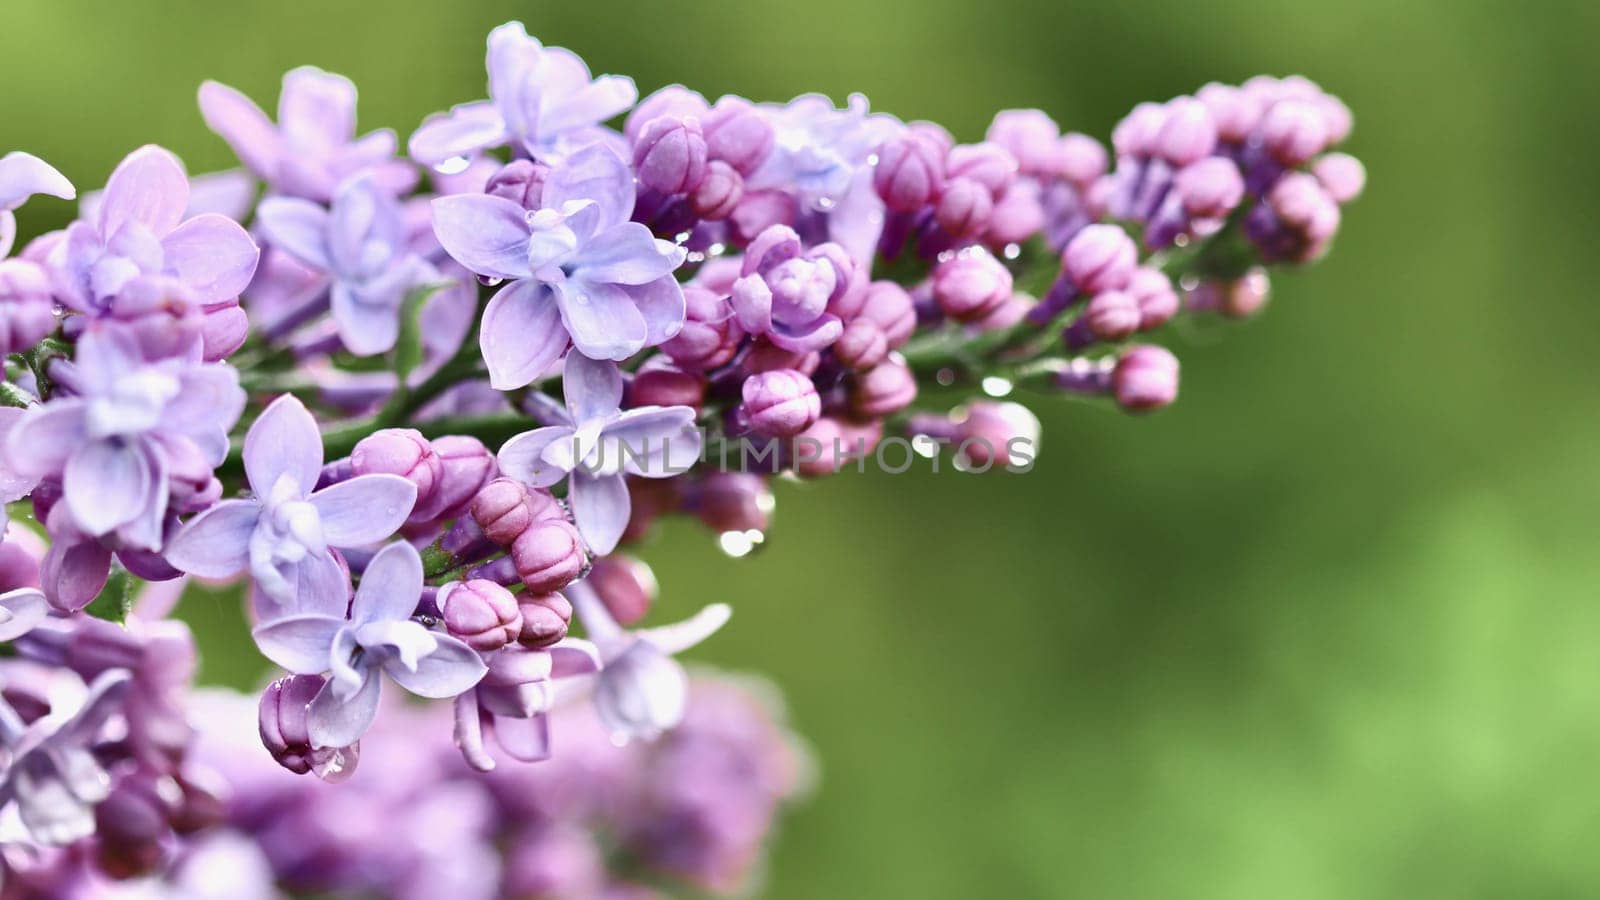 Blooming purple terry lilac with water drops after rain against green background. Soft focus by Olayola